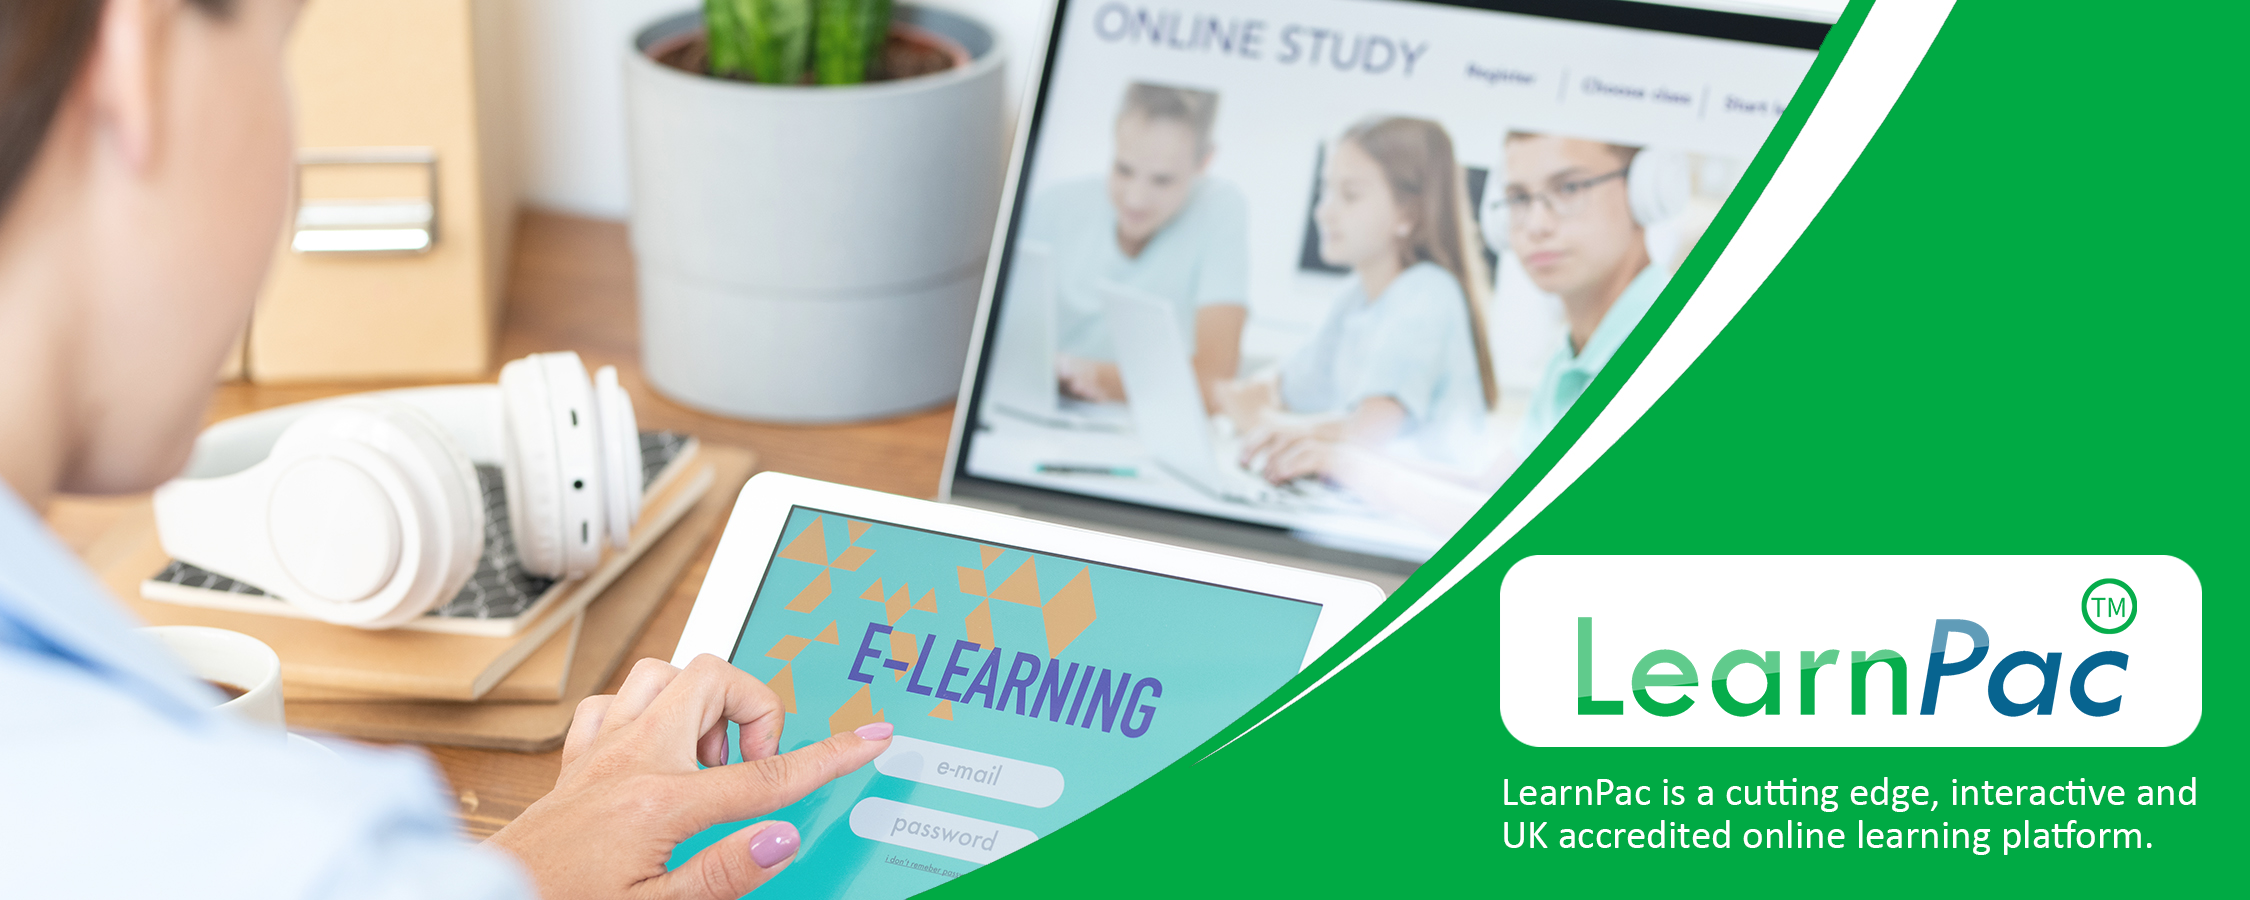 Understanding Care Needs and Development of Children Aged 3 to 5 - Online Learning Courses - E-Learning Courses - LearnPac Systems UK -